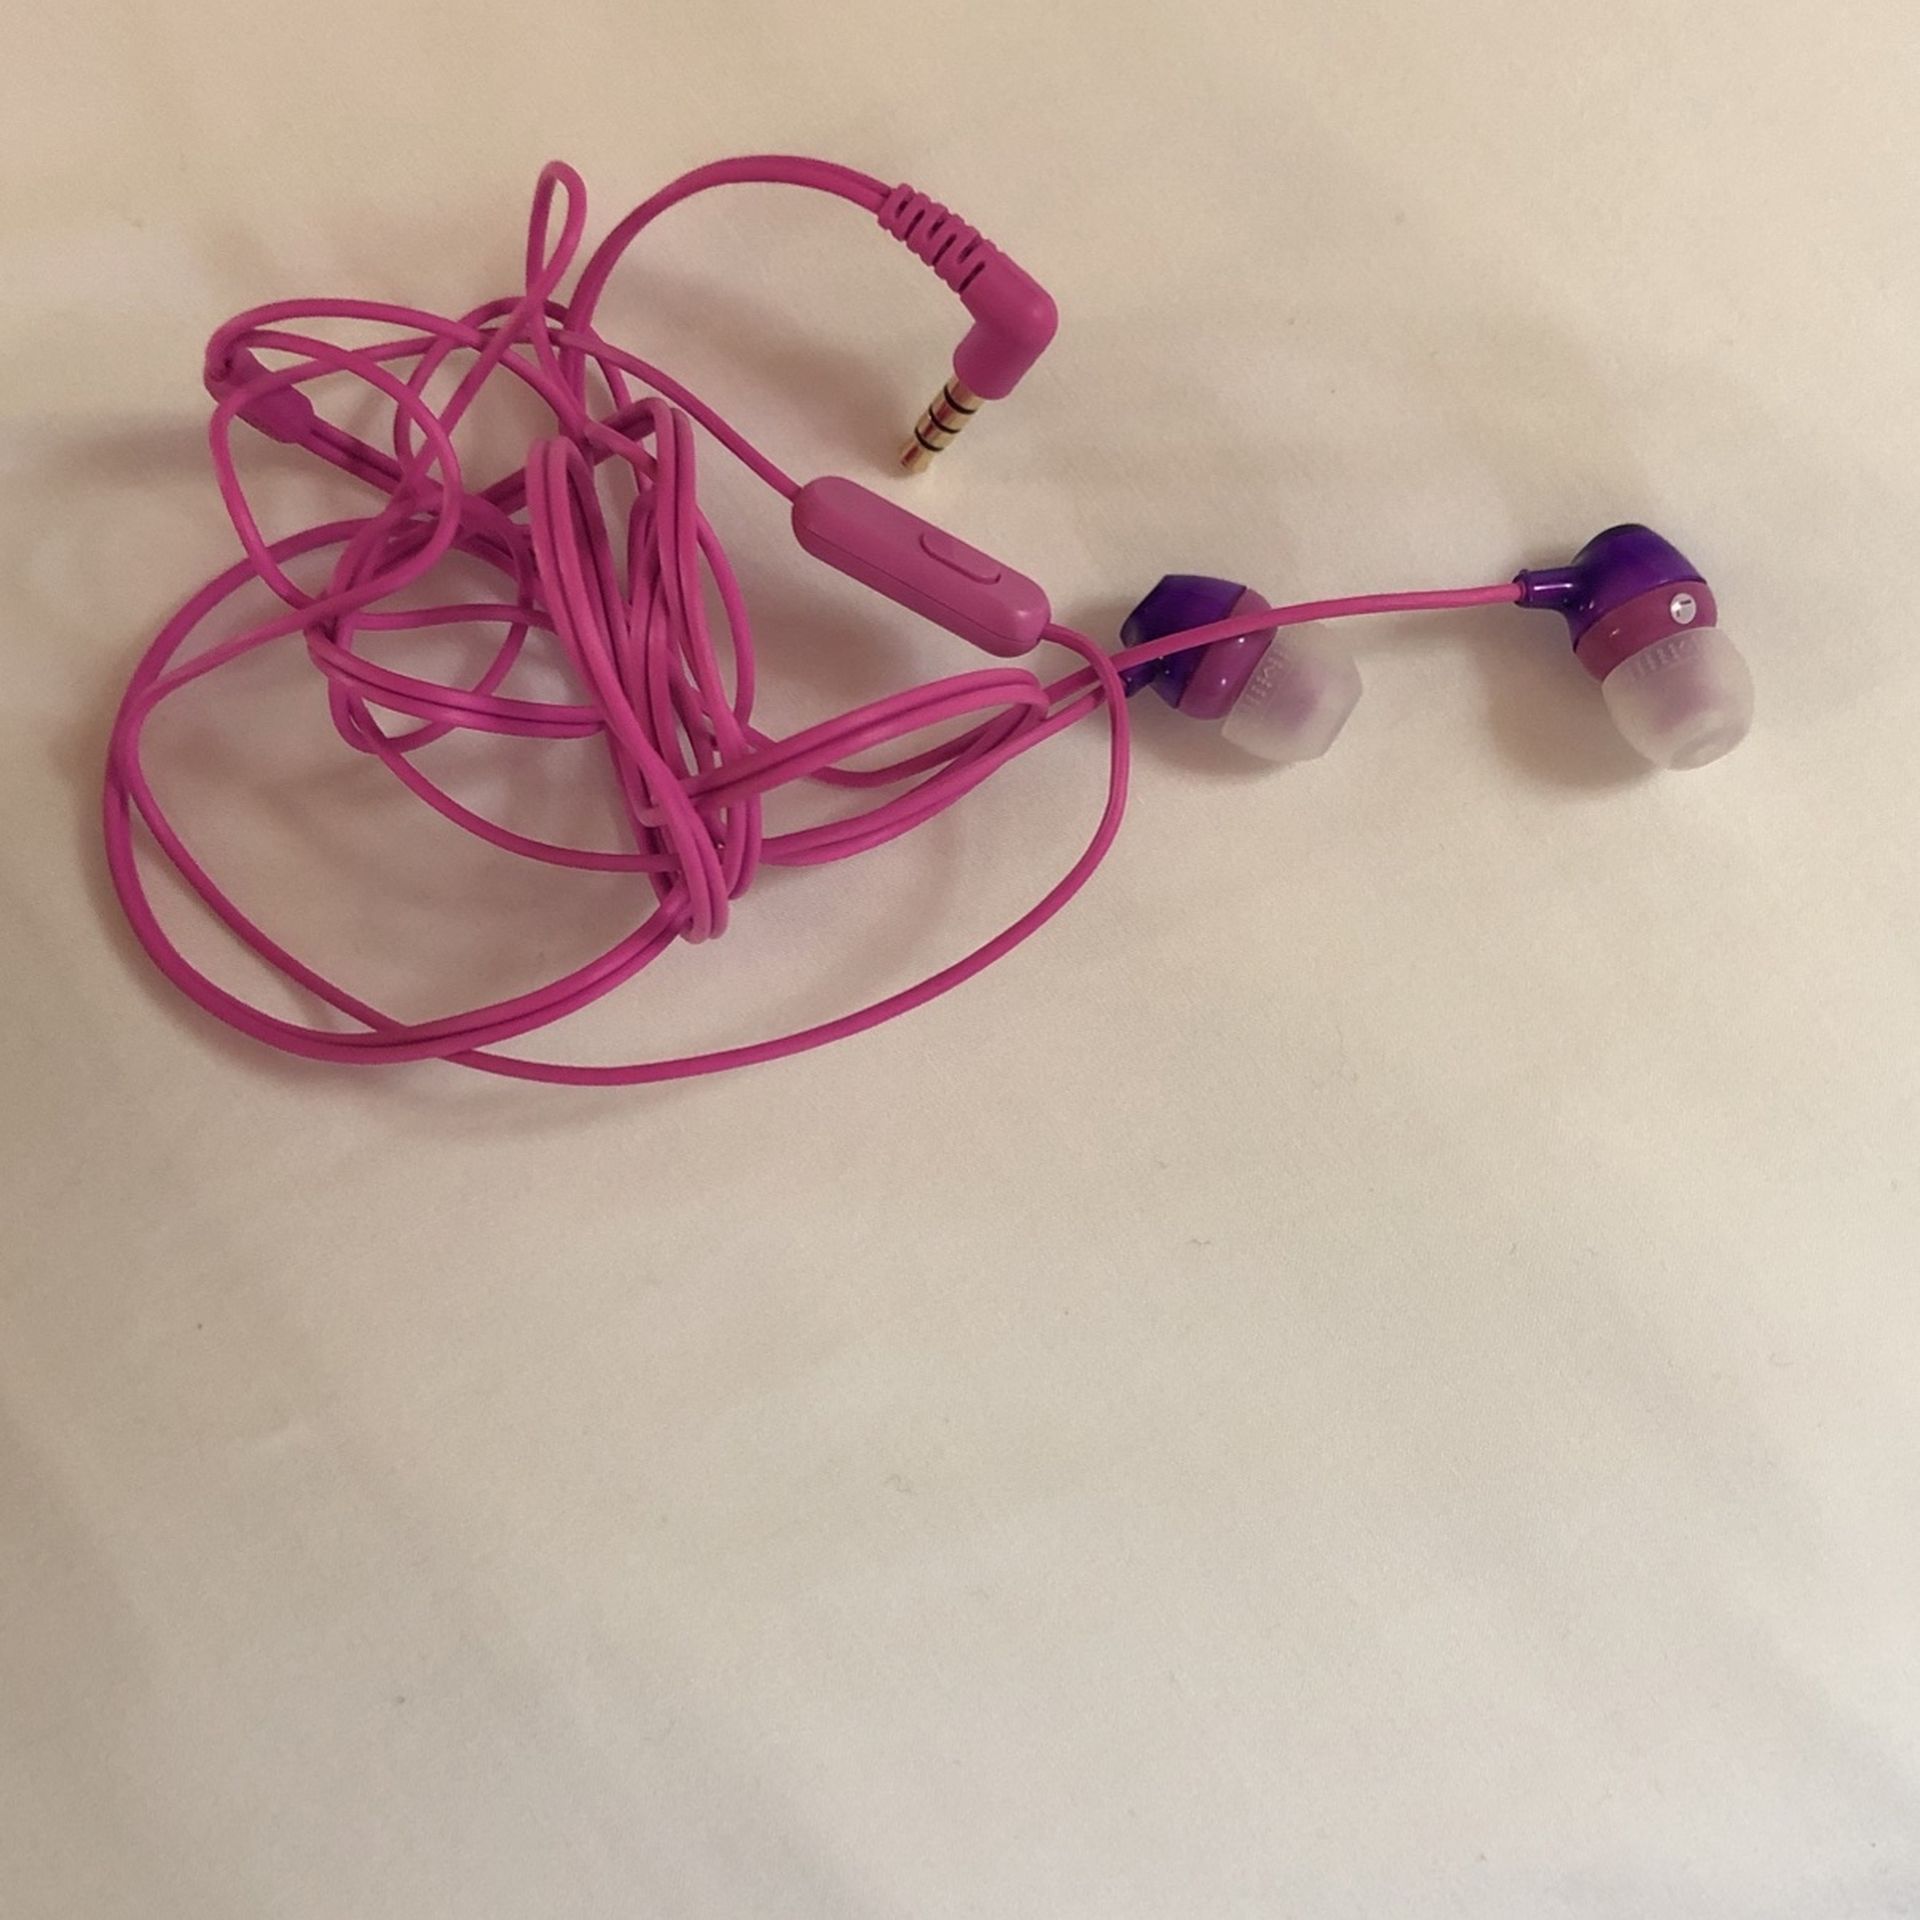 Sony Android Headphones Used Once